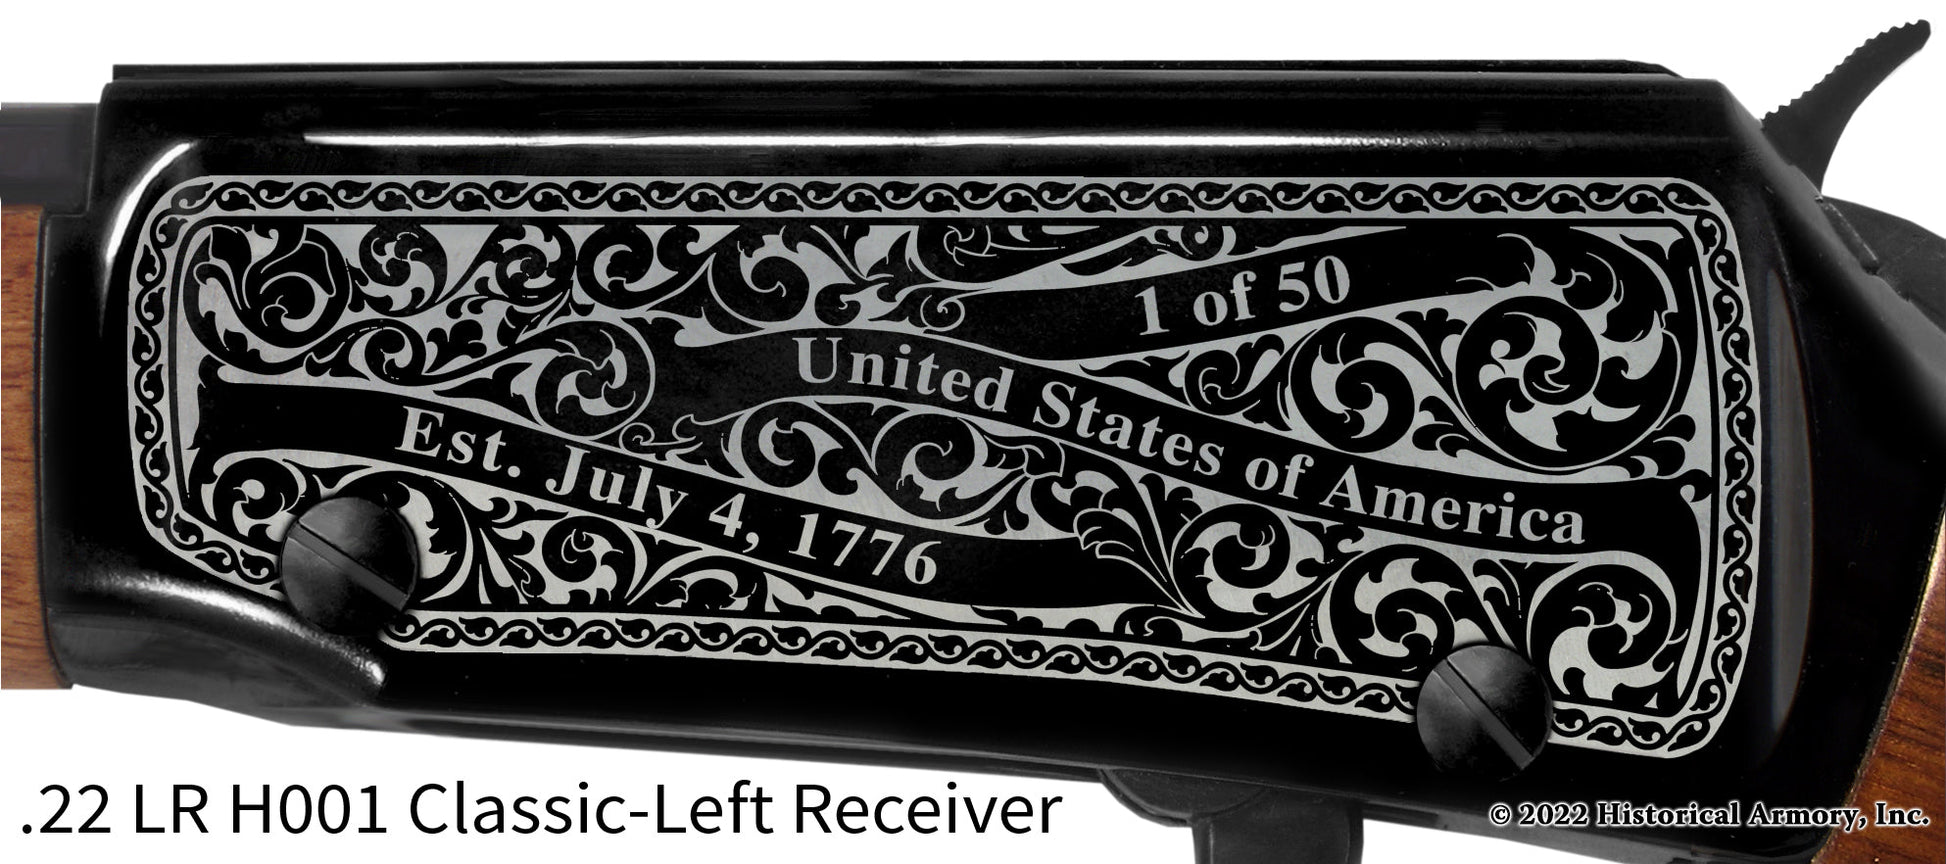 Lamar County Mississippi Engraved Henry H001 Rifle